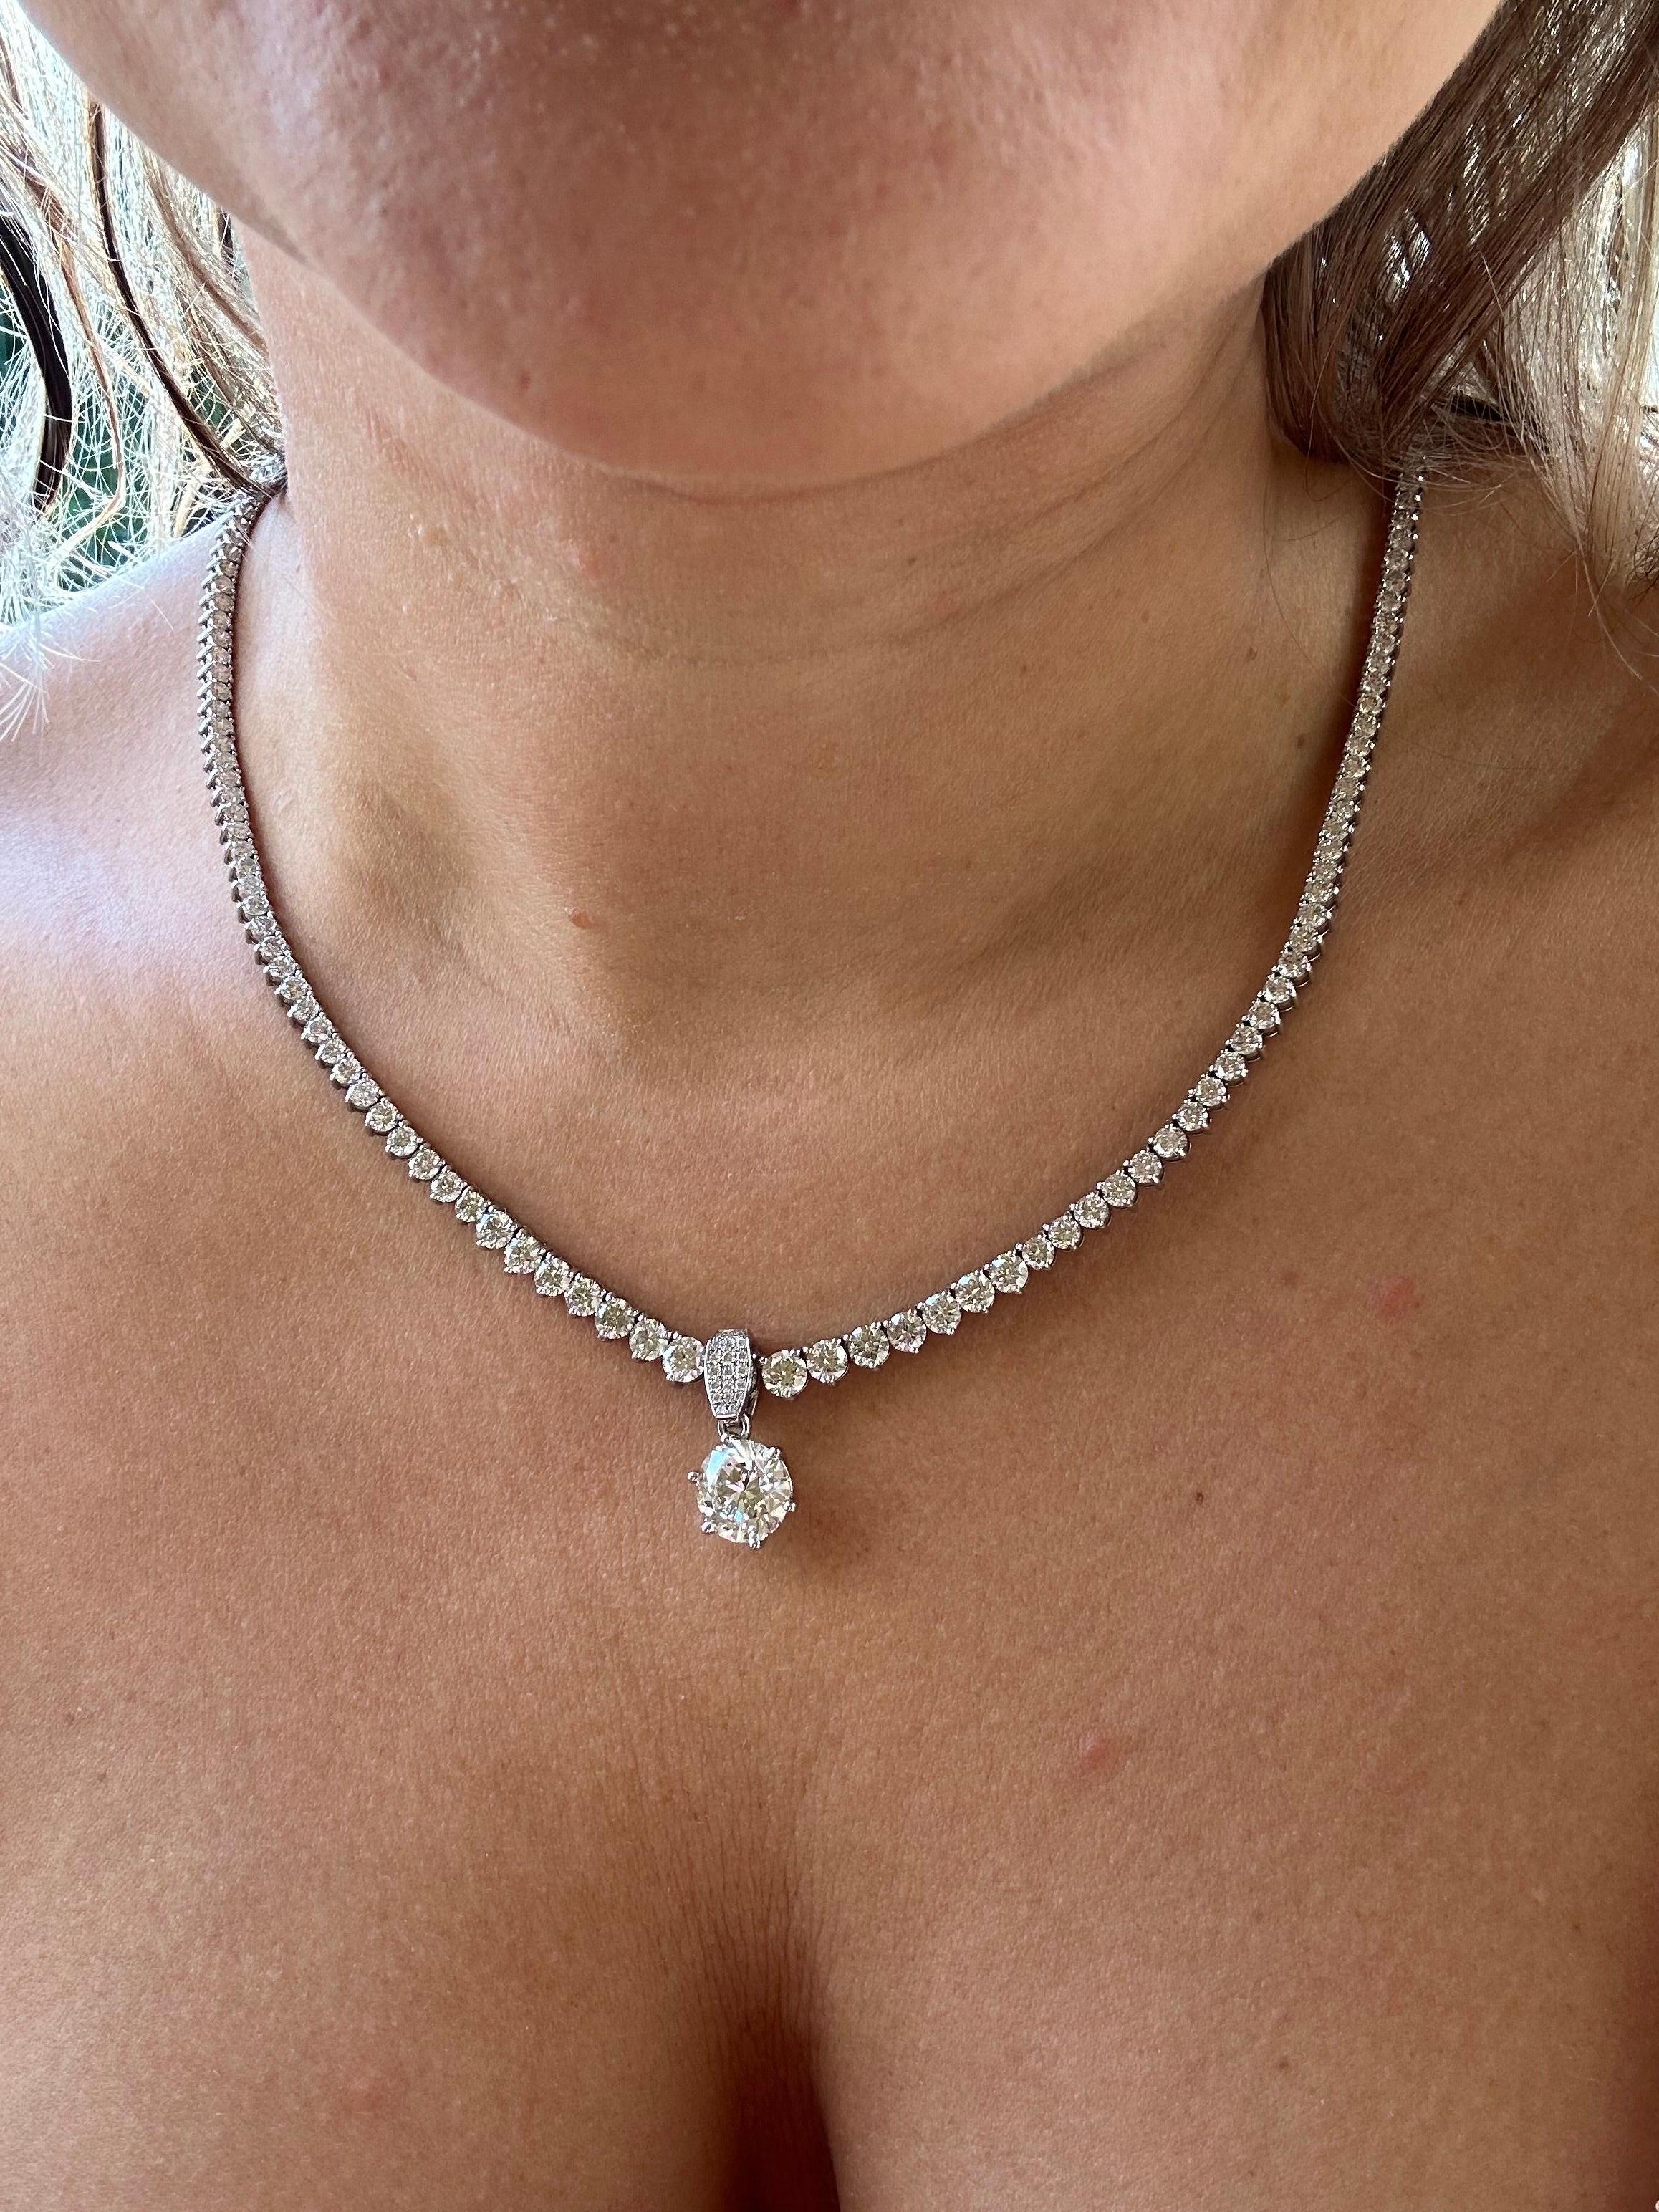 Stunning diamond necklace over 20 carats in 18KT gold For Sale 1